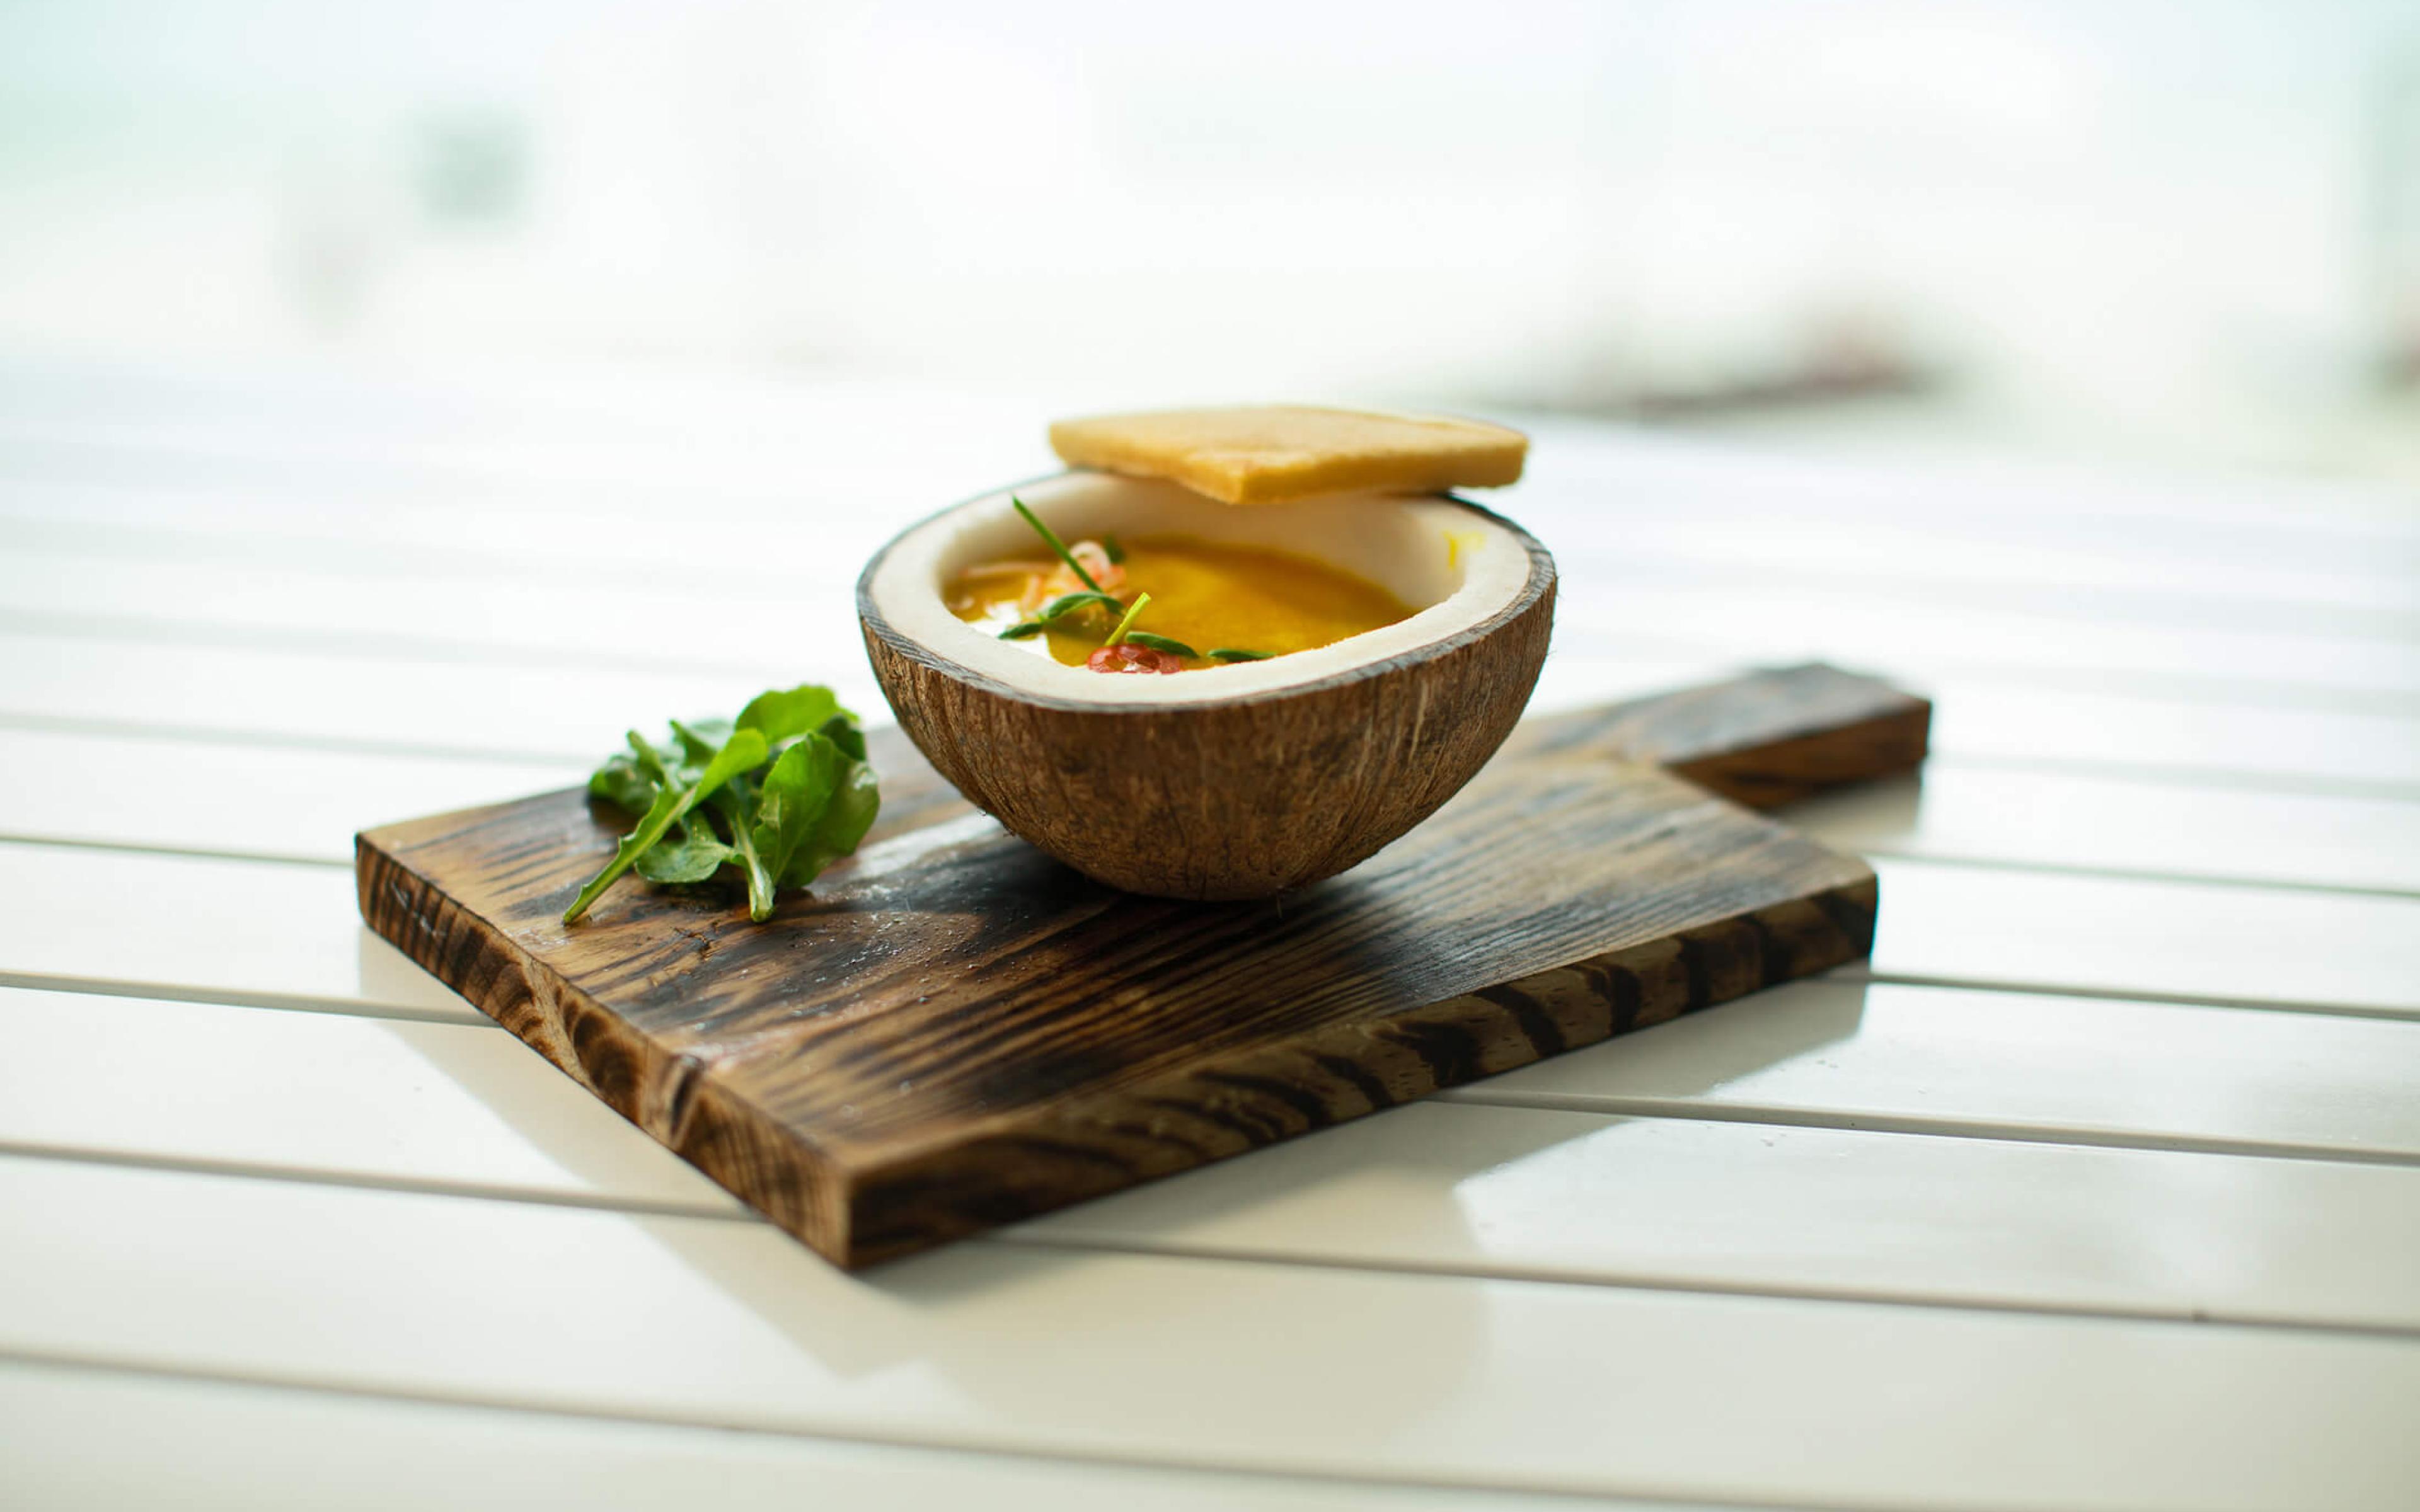 An elegant bowl of soup served in a coconut